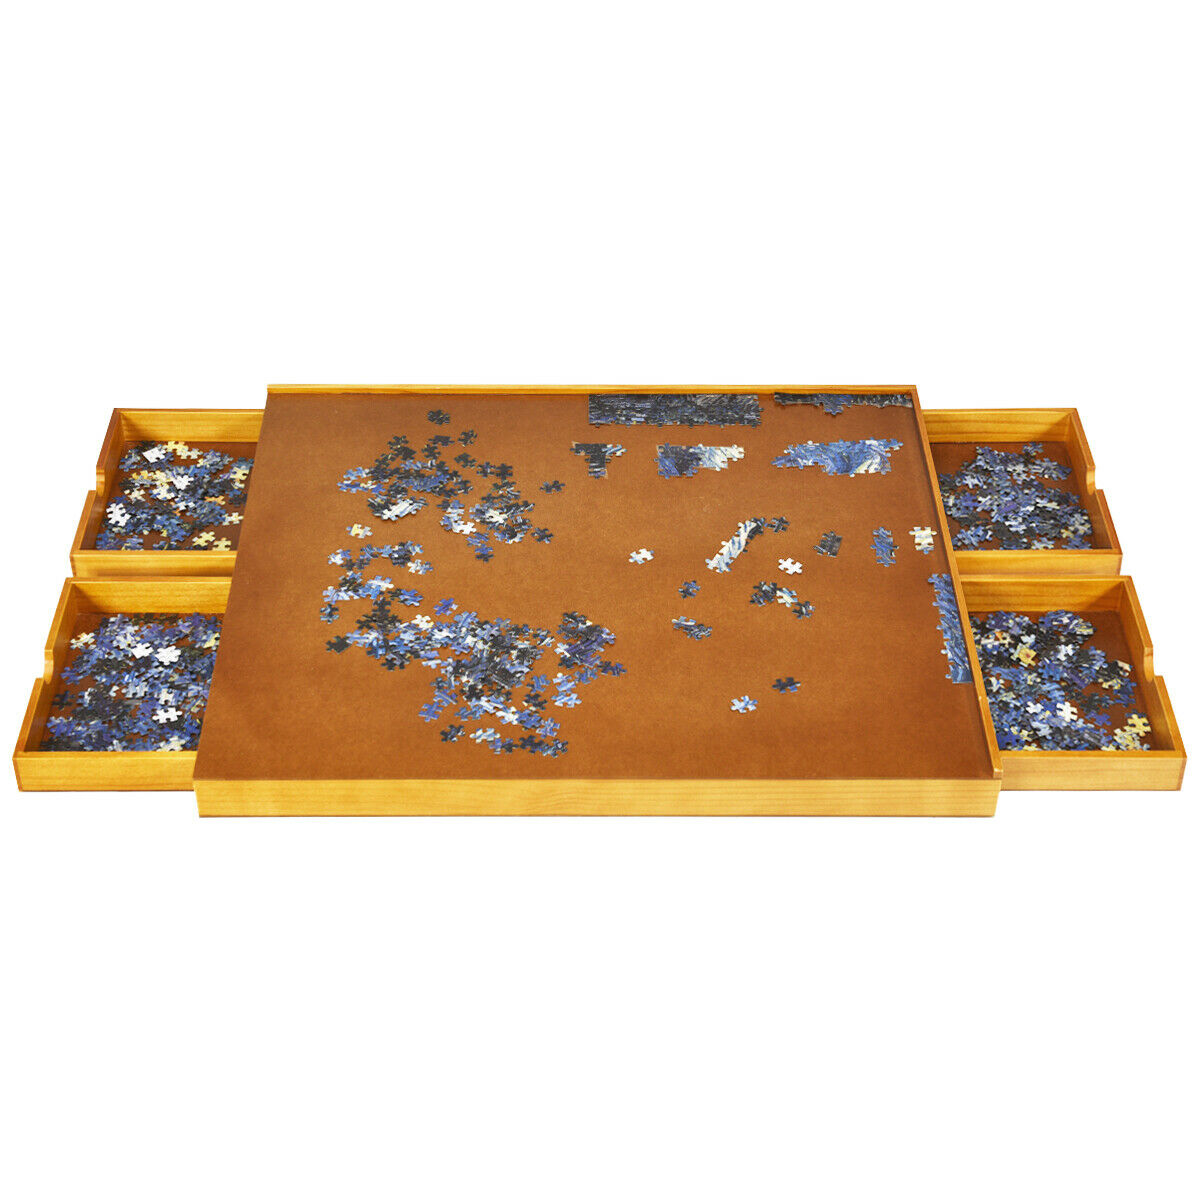 Wooden Jigsaw Puzzle Board with 4 Drawers